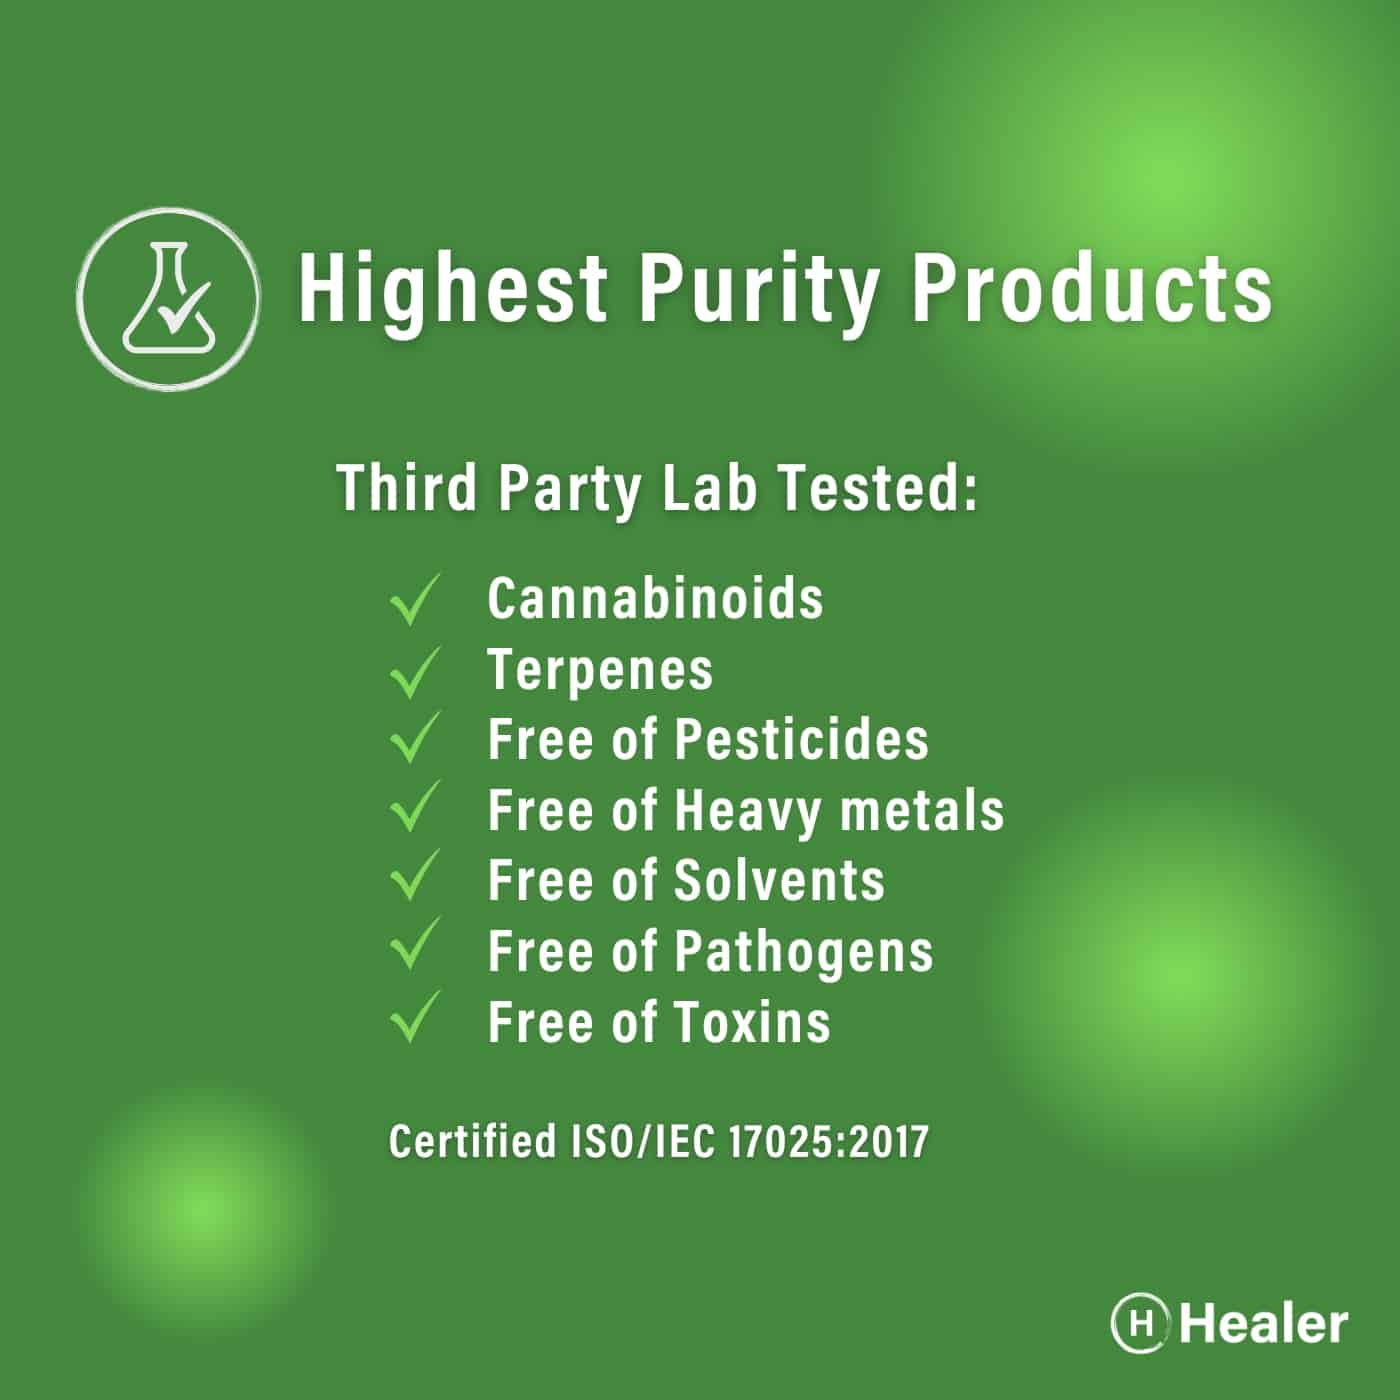 Healer Products are third-party lab-tested